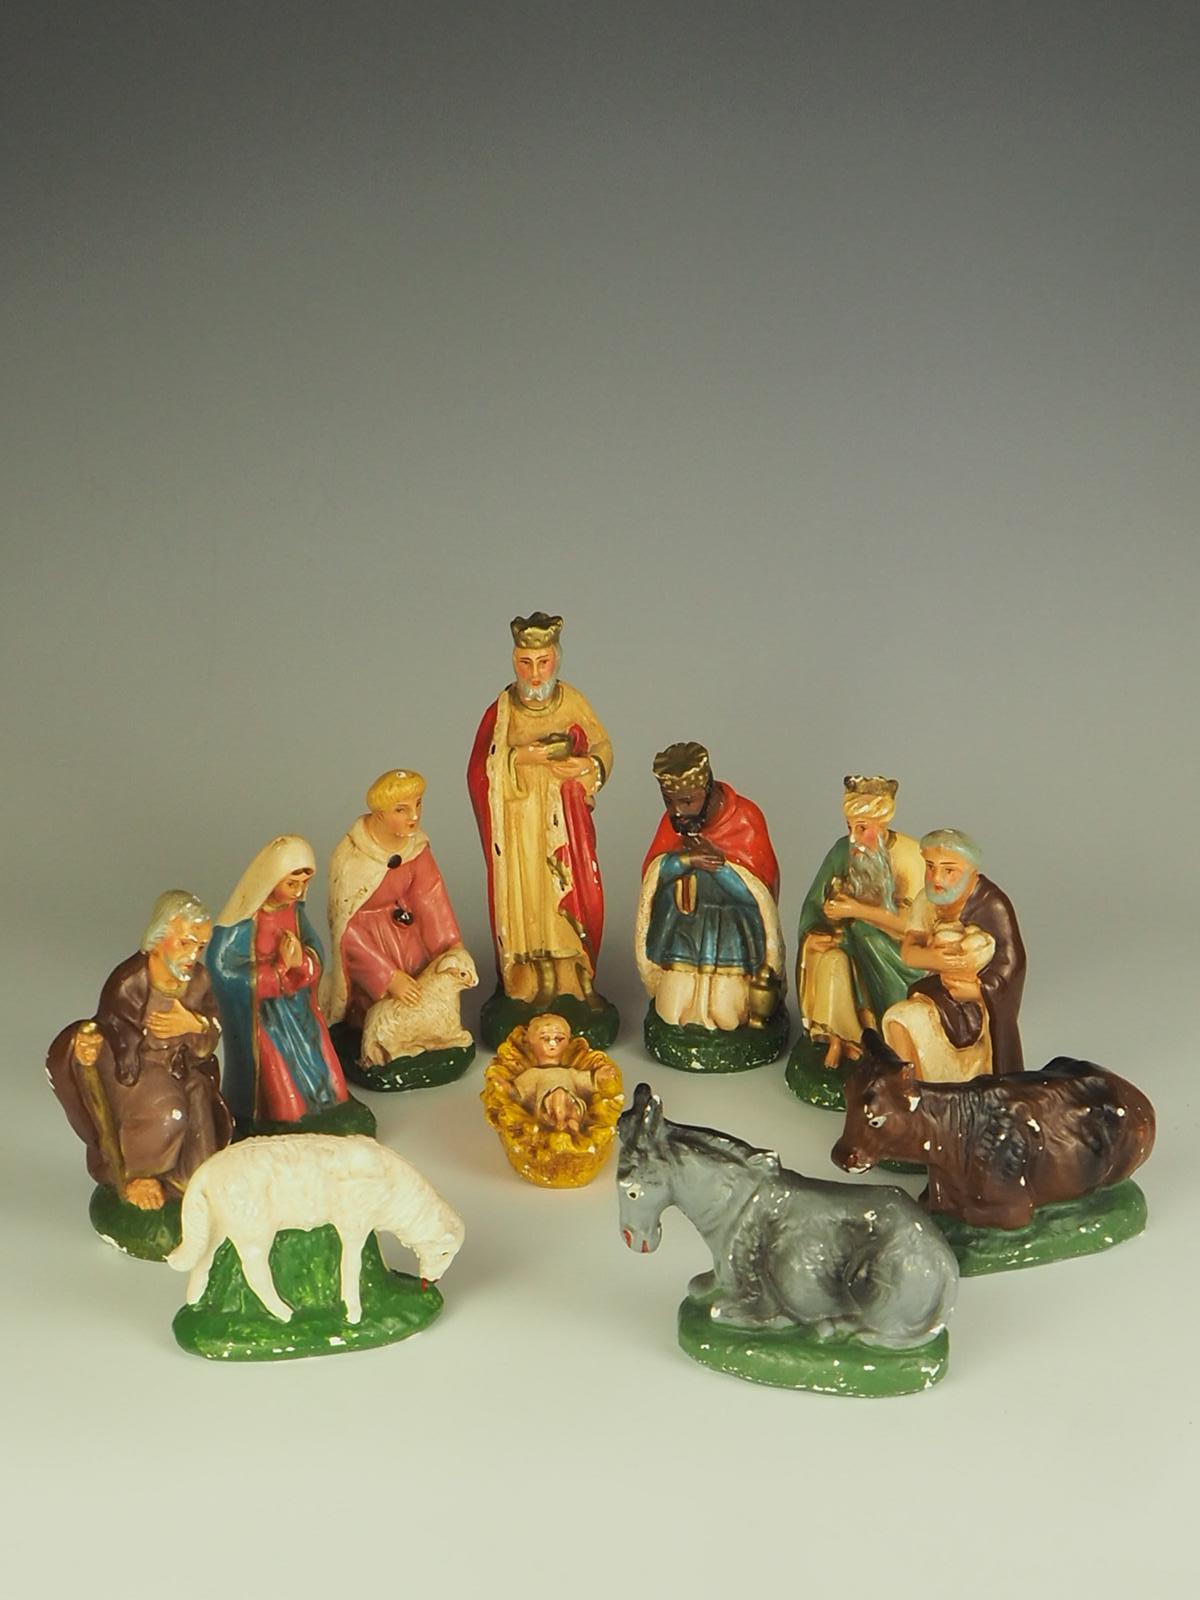 Antique Plaster Nativity Set for a Traditional Christmas

11 Piece Hand Painted

Height:  14  cm   /  5.5  inches

Weight:  1 k.g.